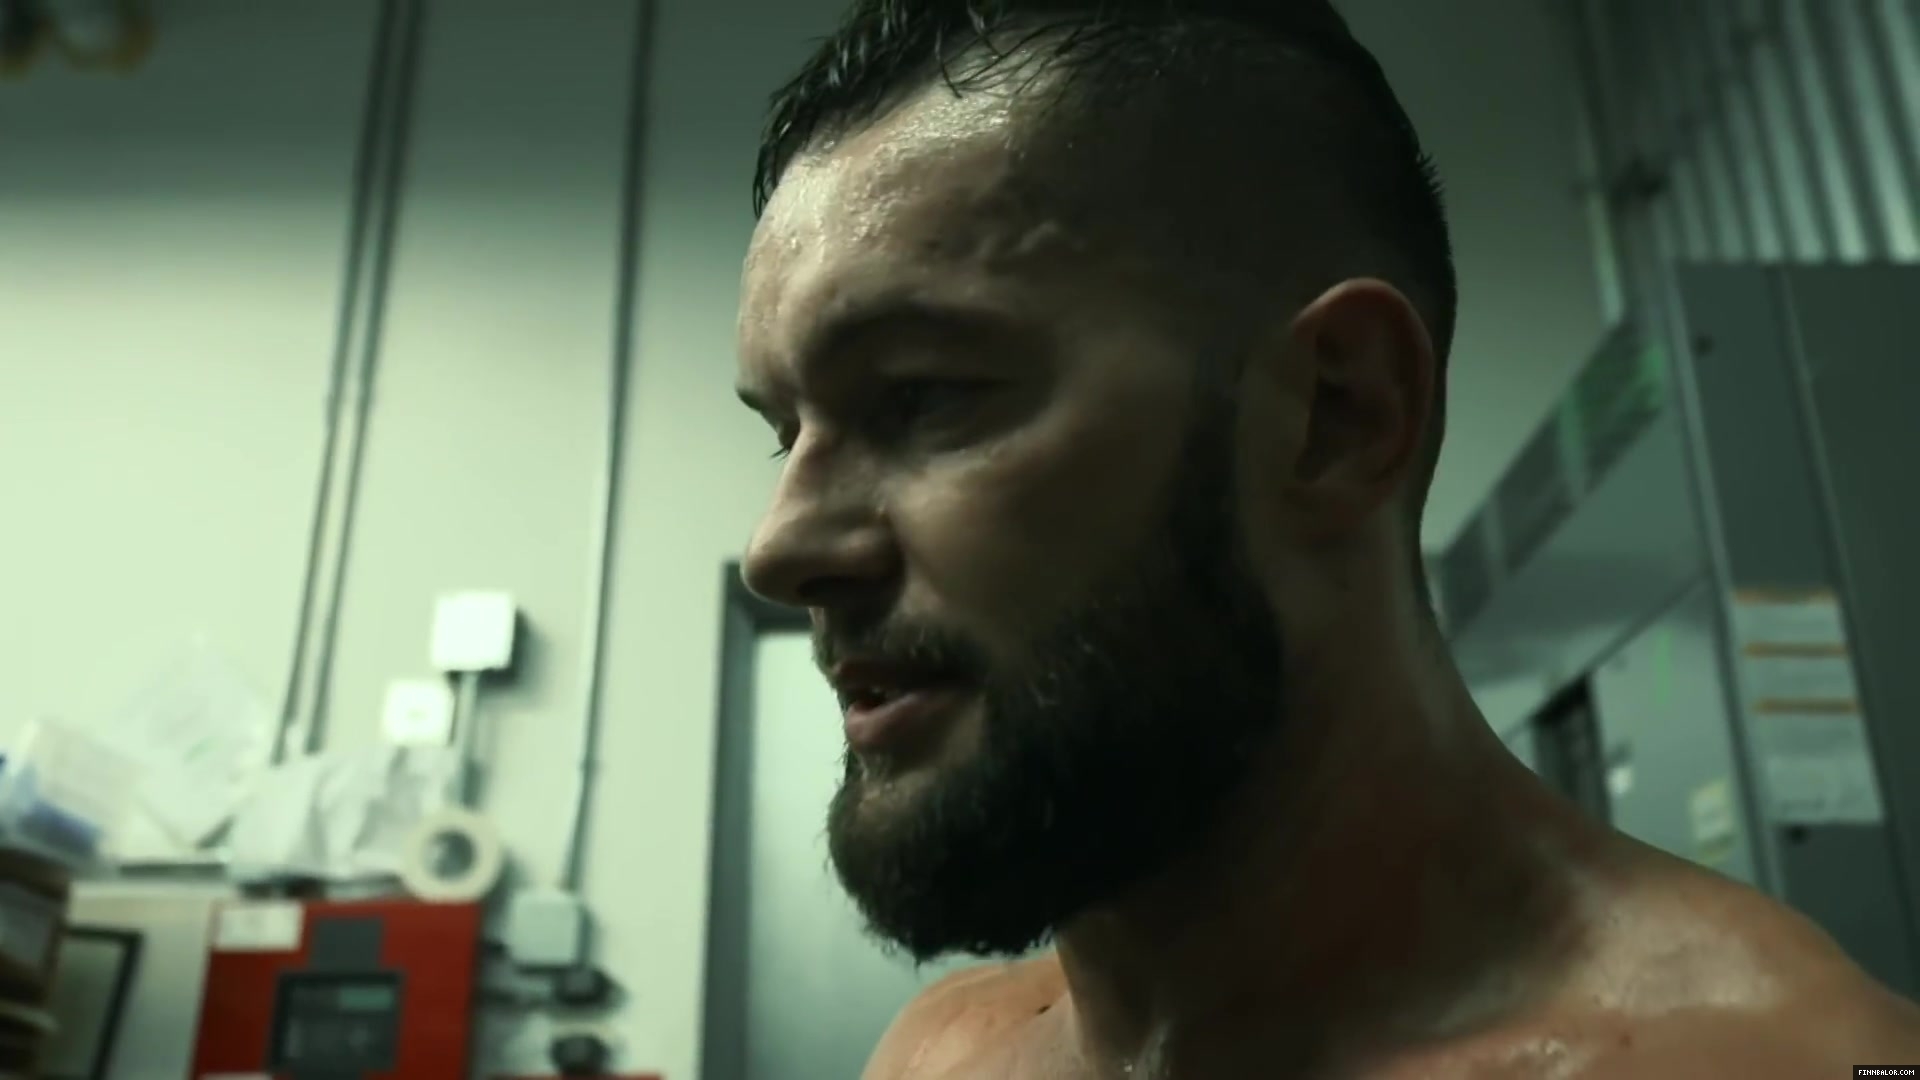 Finn_Balor___The_Rising_of_the_Prince_in_NXT_258.jpg